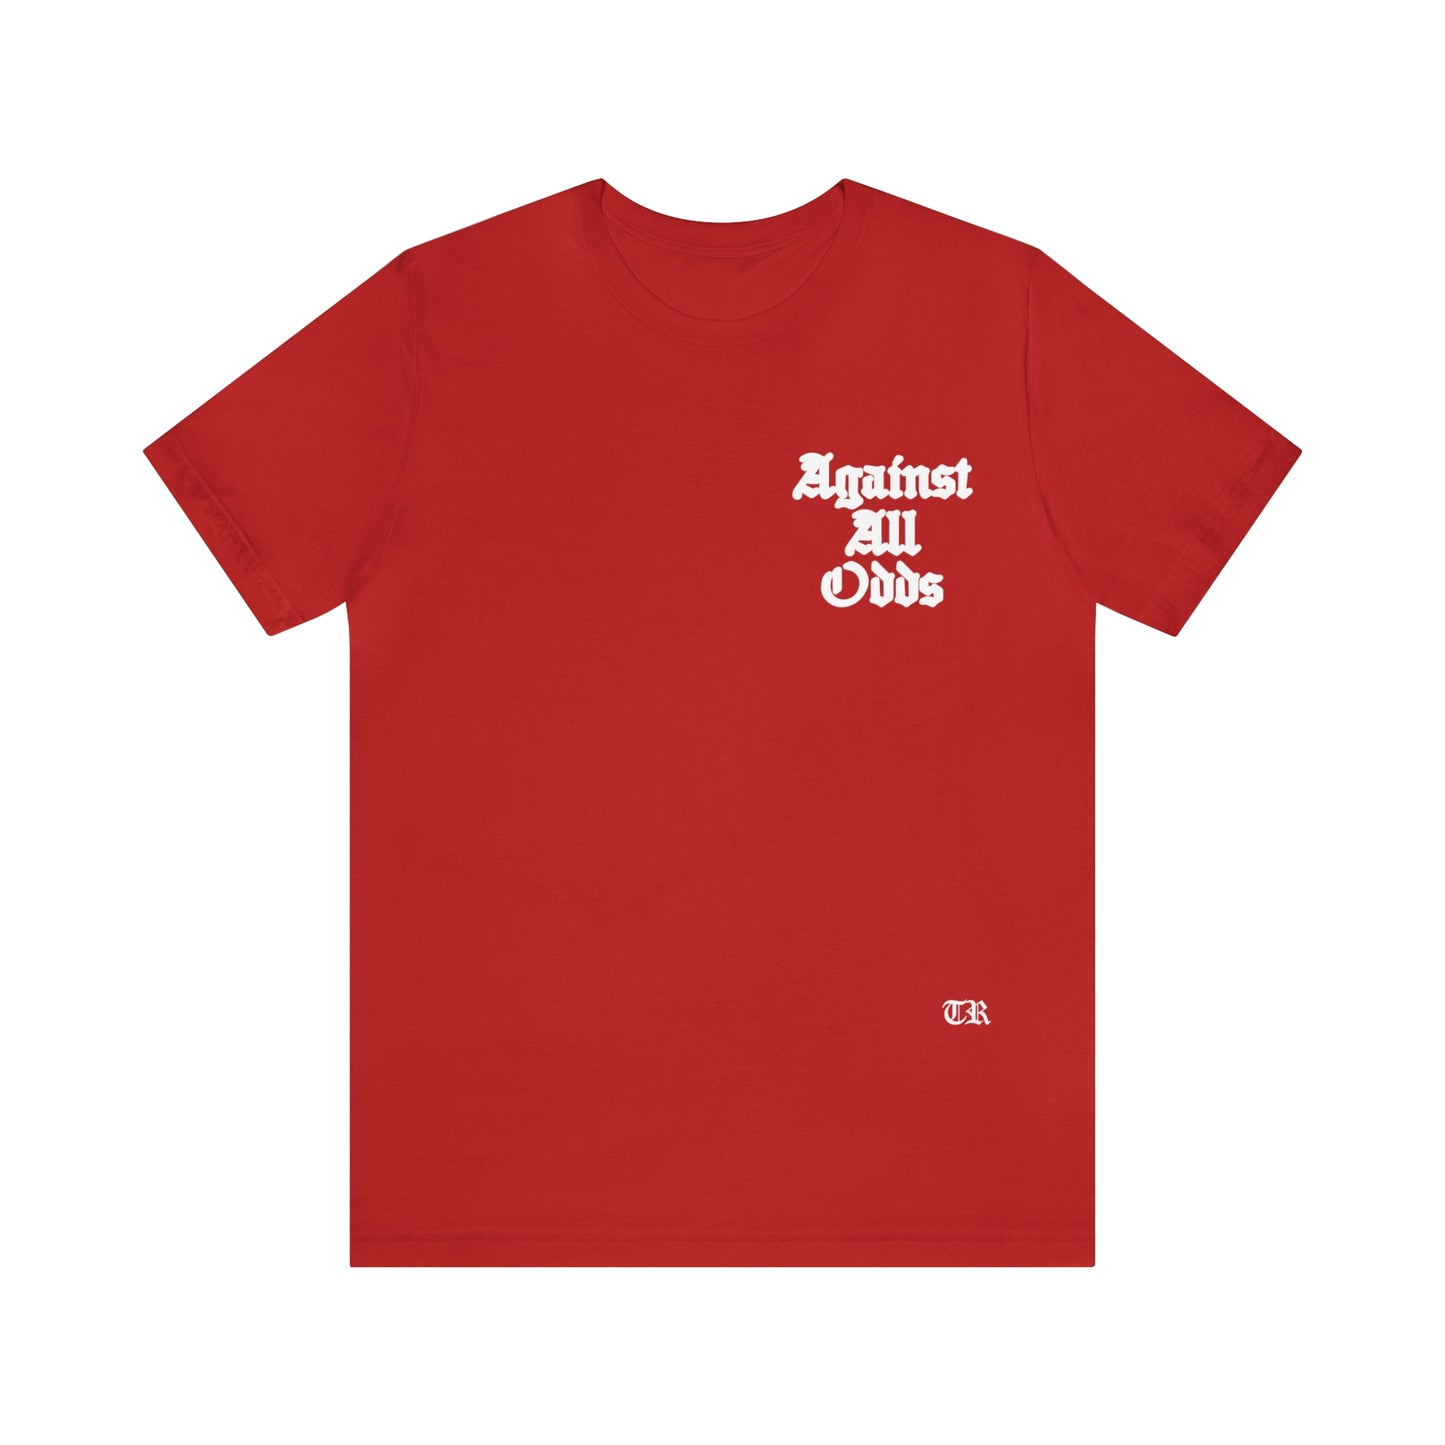 Tamiah Robinson: Against All Odds Tee